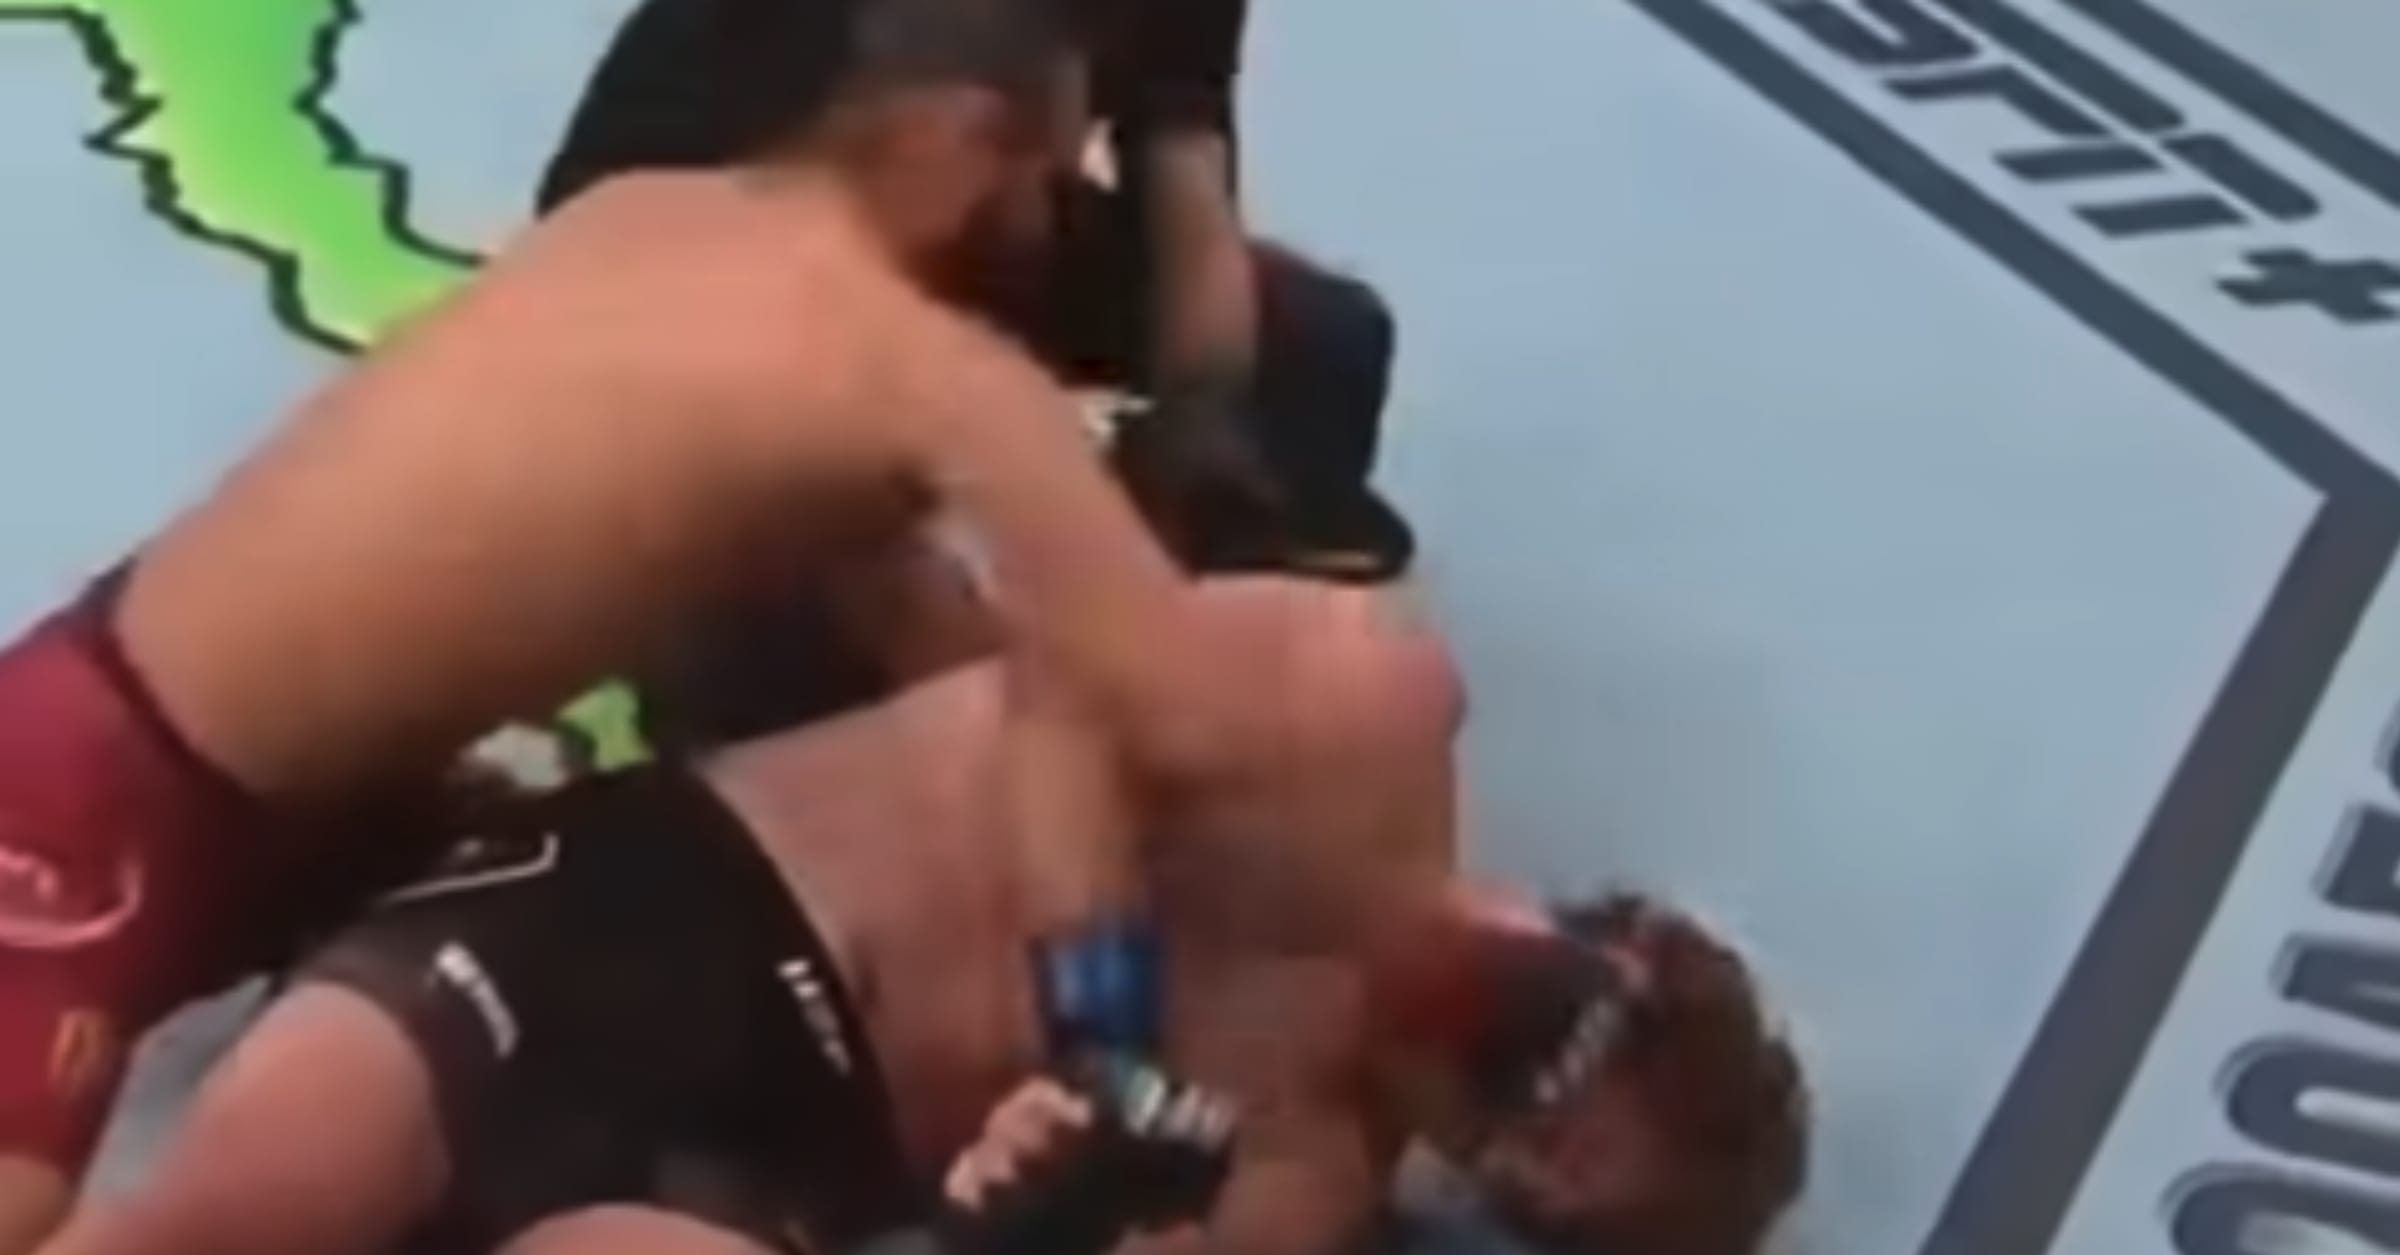 50 Most Brutal Knockouts Ever in UFC - MMA Fighter 